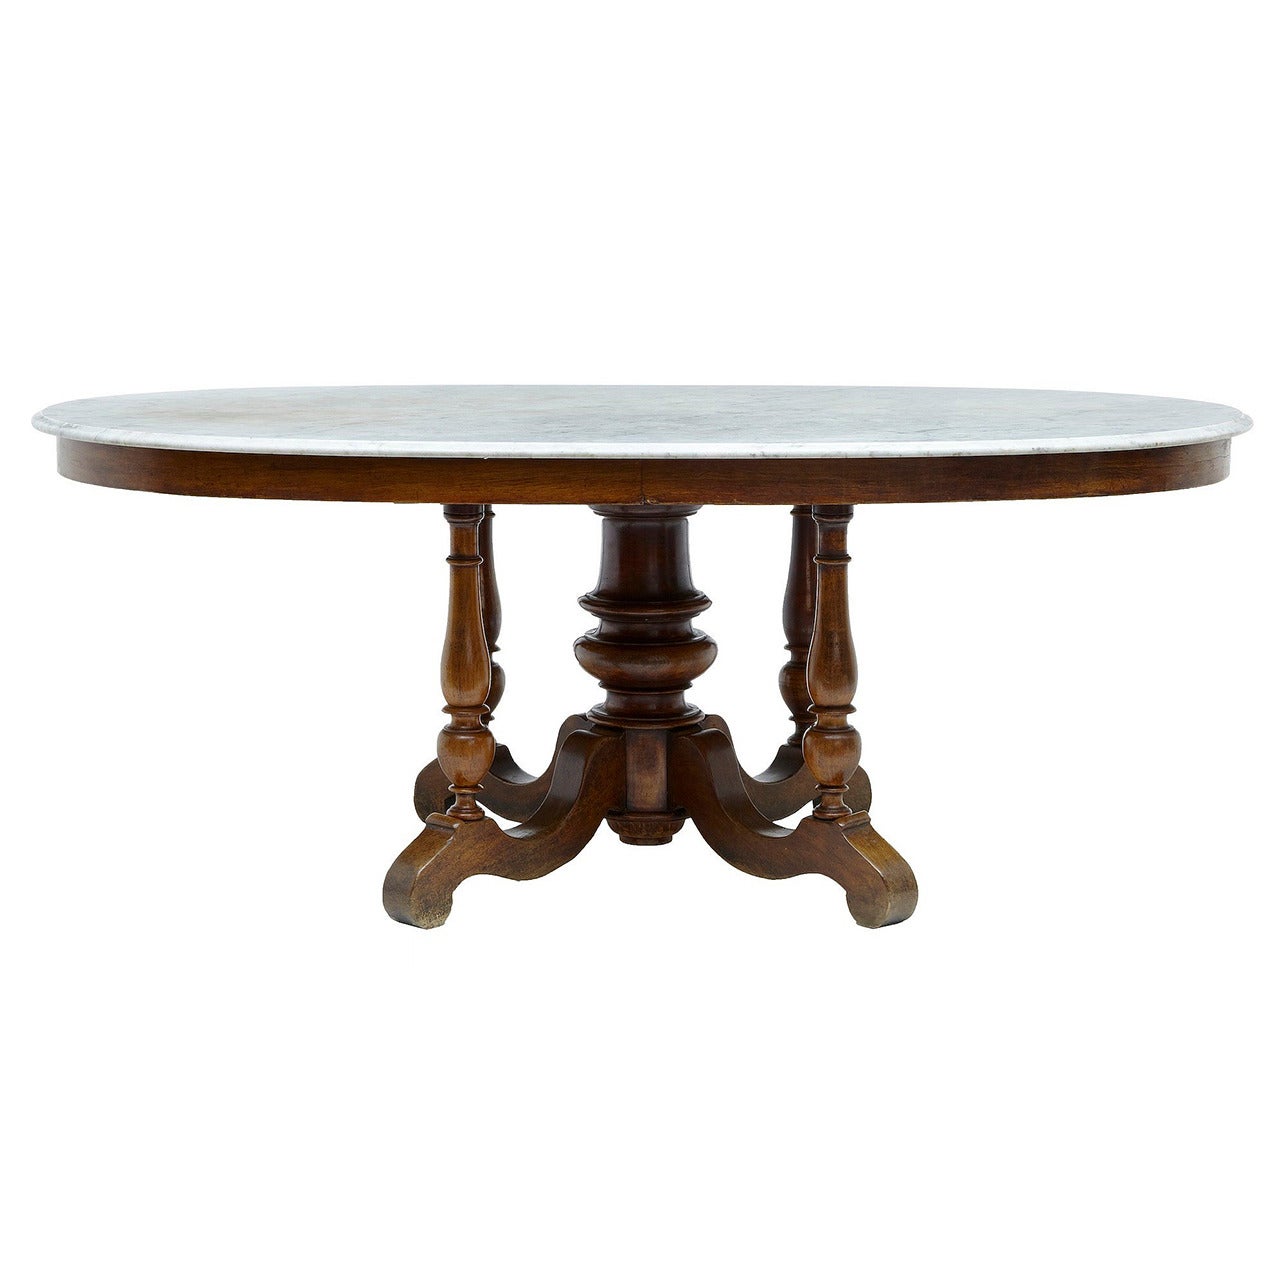 Rare 19th Century French Walnut Gueridon Marble-Top Table